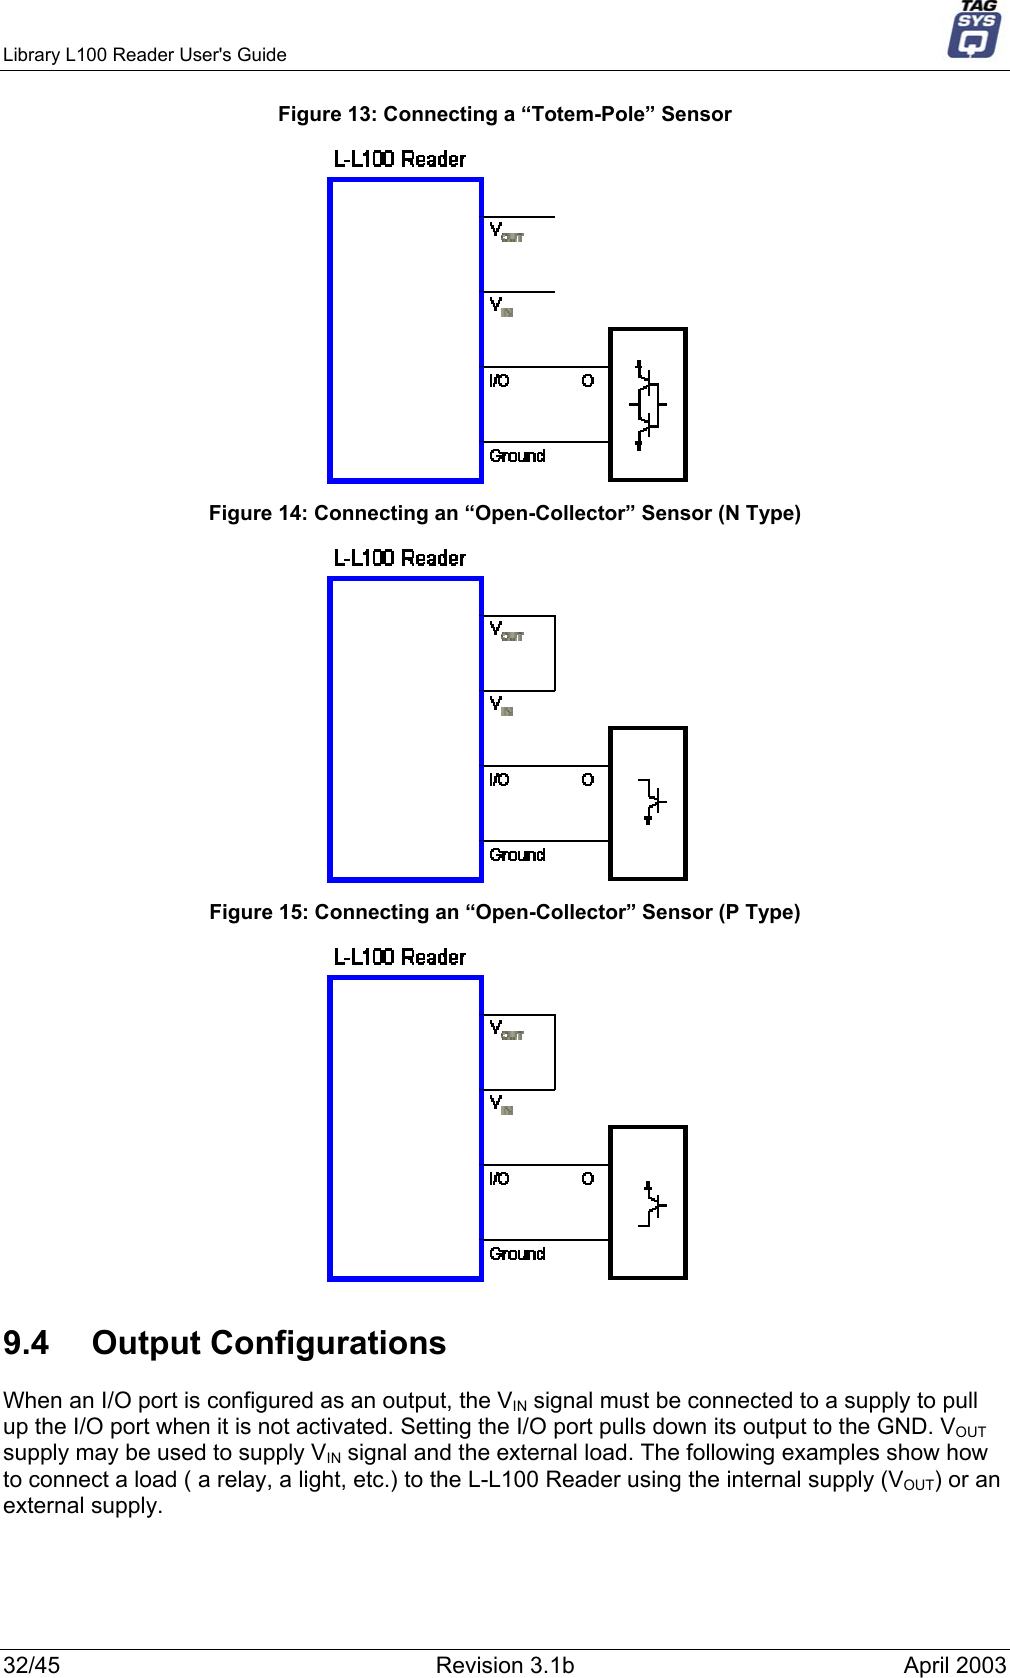 Library L100 Reader User&apos;s Guide     Figure 13: Connecting a “Totem-Pole” Sensor  Figure 14: Connecting an “Open-Collector” Sensor (N Type)  Figure 15: Connecting an “Open-Collector” Sensor (P Type)  9.4 Output Configurations When an I/O port is configured as an output, the VIN signal must be connected to a supply to pull up the I/O port when it is not activated. Setting the I/O port pulls down its output to the GND. VOUT supply may be used to supply VIN signal and the external load. The following examples show how to connect a load ( a relay, a light, etc.) to the L-L100 Reader using the internal supply (VOUT) or an external supply. 32/45  Revision 3.1b  April 2003 